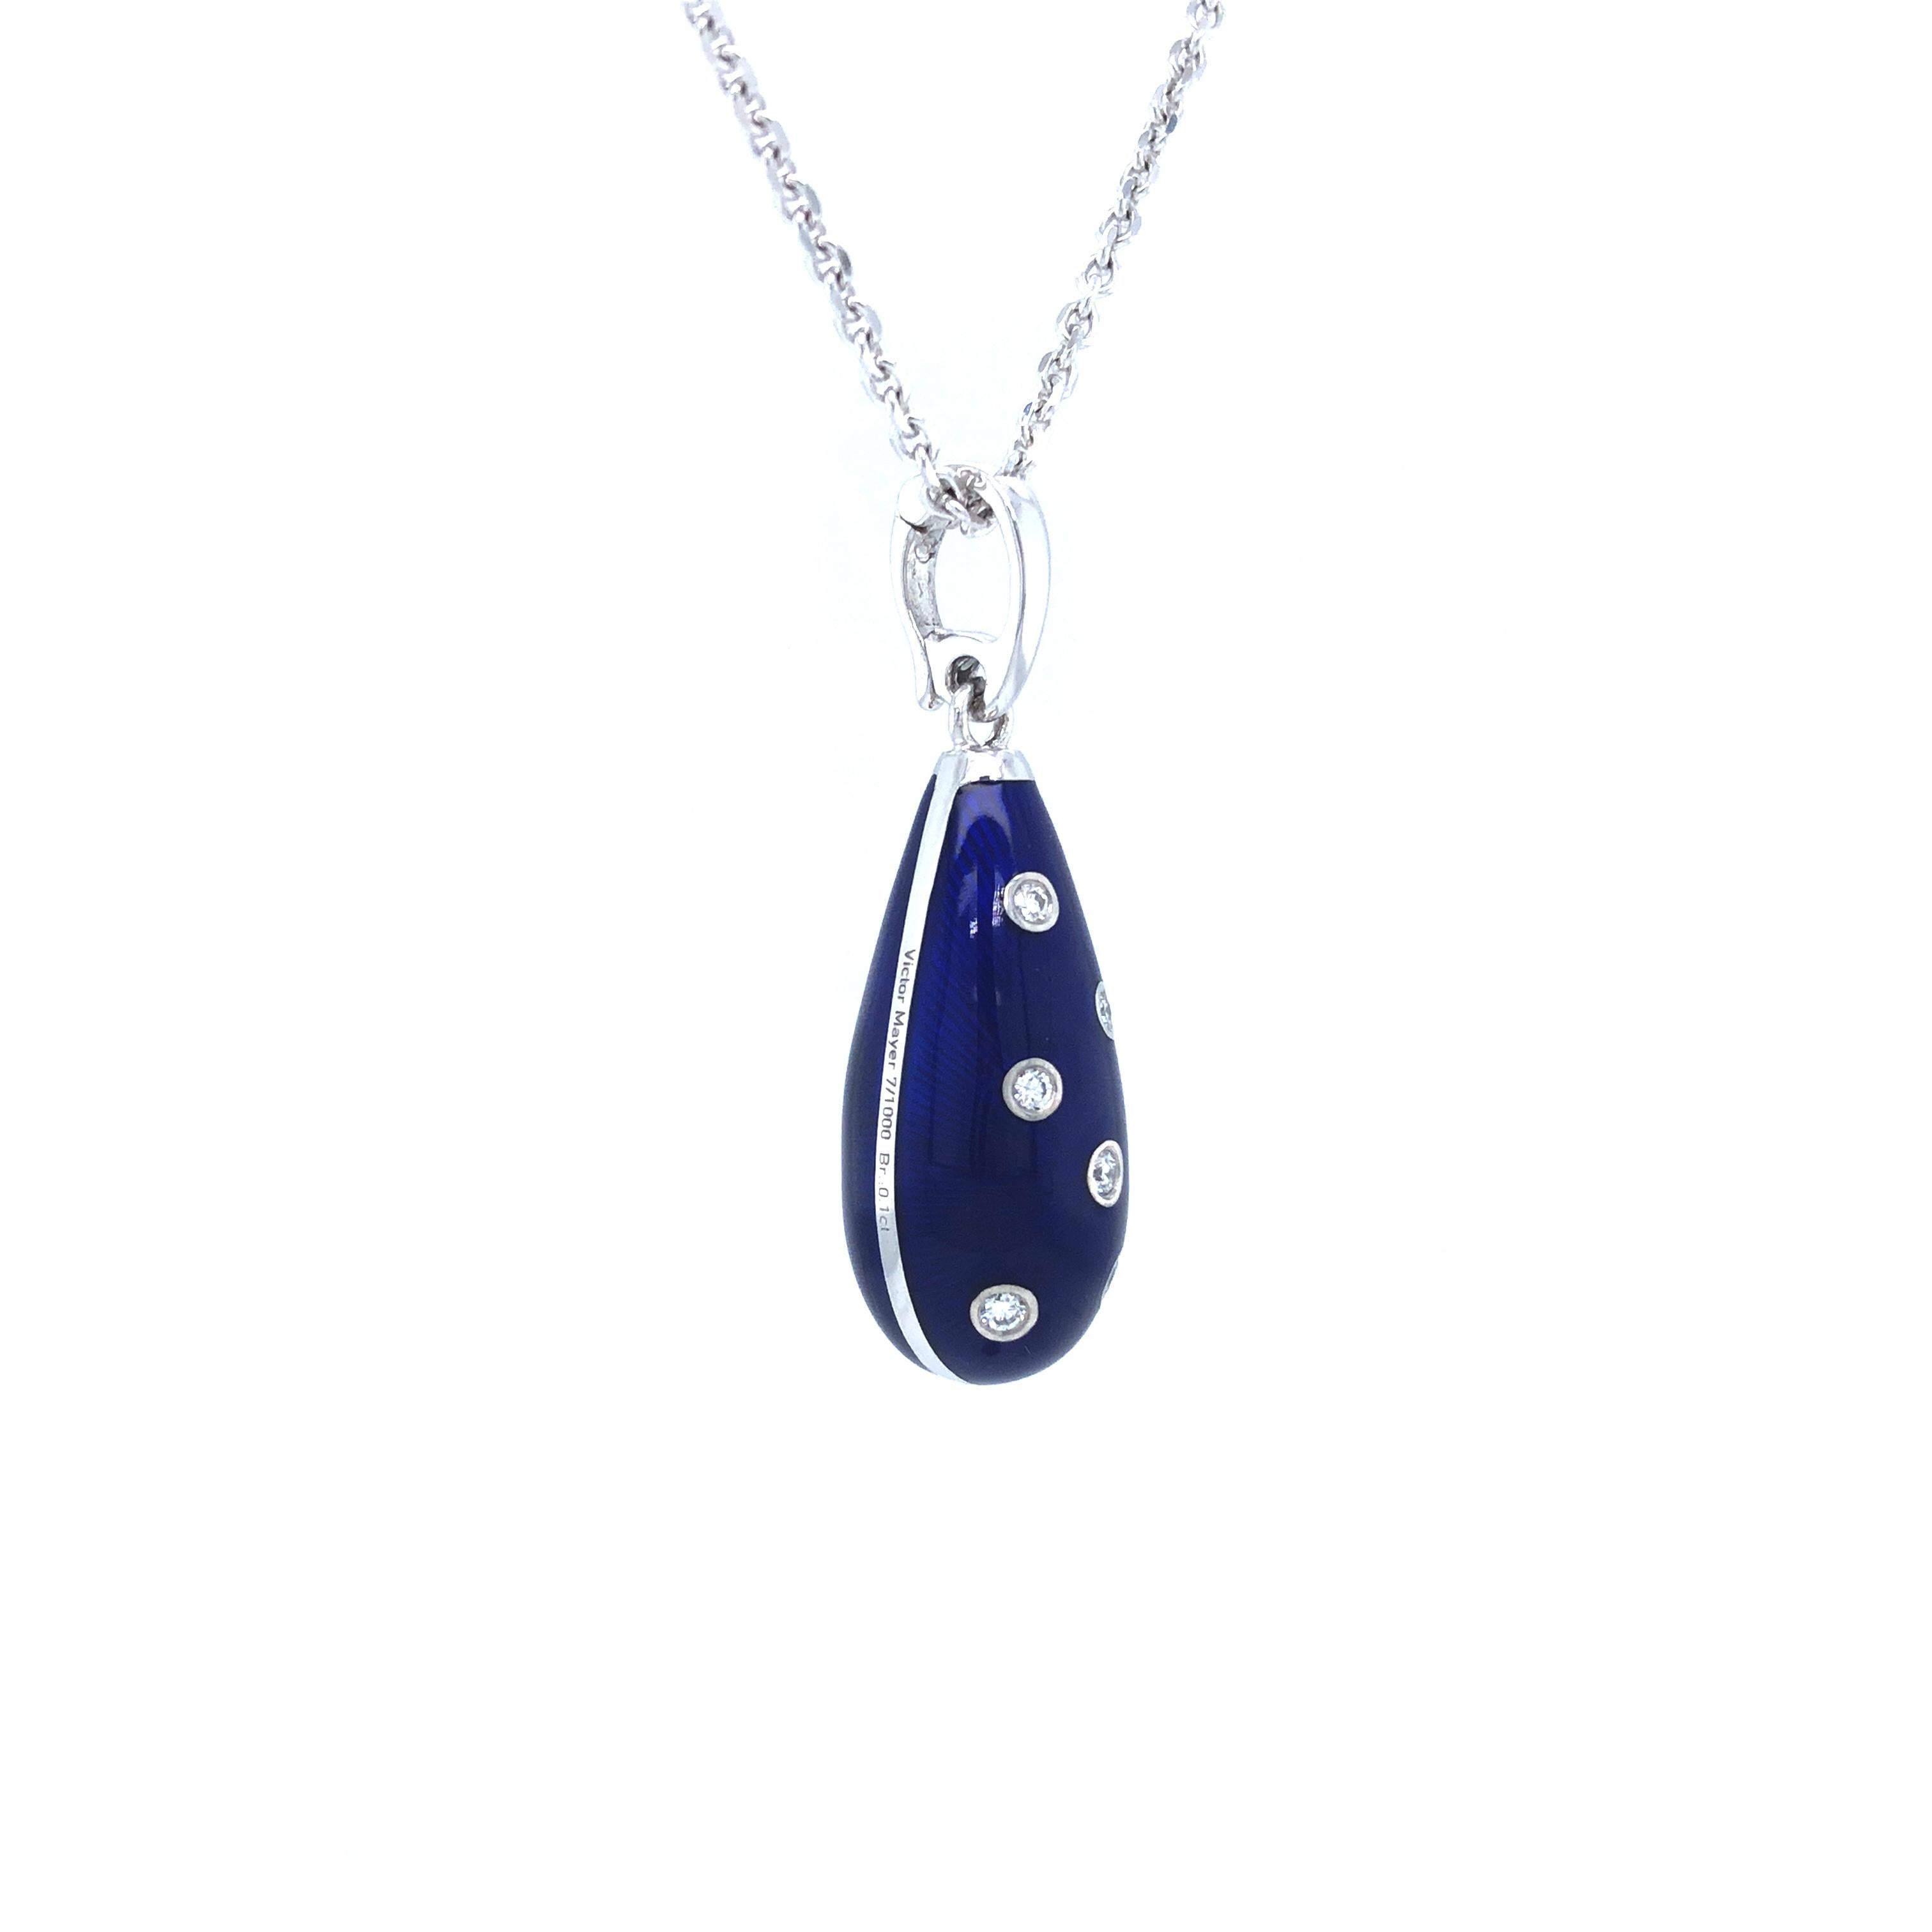 Victor Mayer drop pendant, 18k White Gold, Dew Drop Collection, dark blue vitreous enamel 6 diamonds, total 0.1 ct G VS brilliant cut

About the creator Victor Mayer
Victor Mayer is internationally renowned for elegant timeless designs and